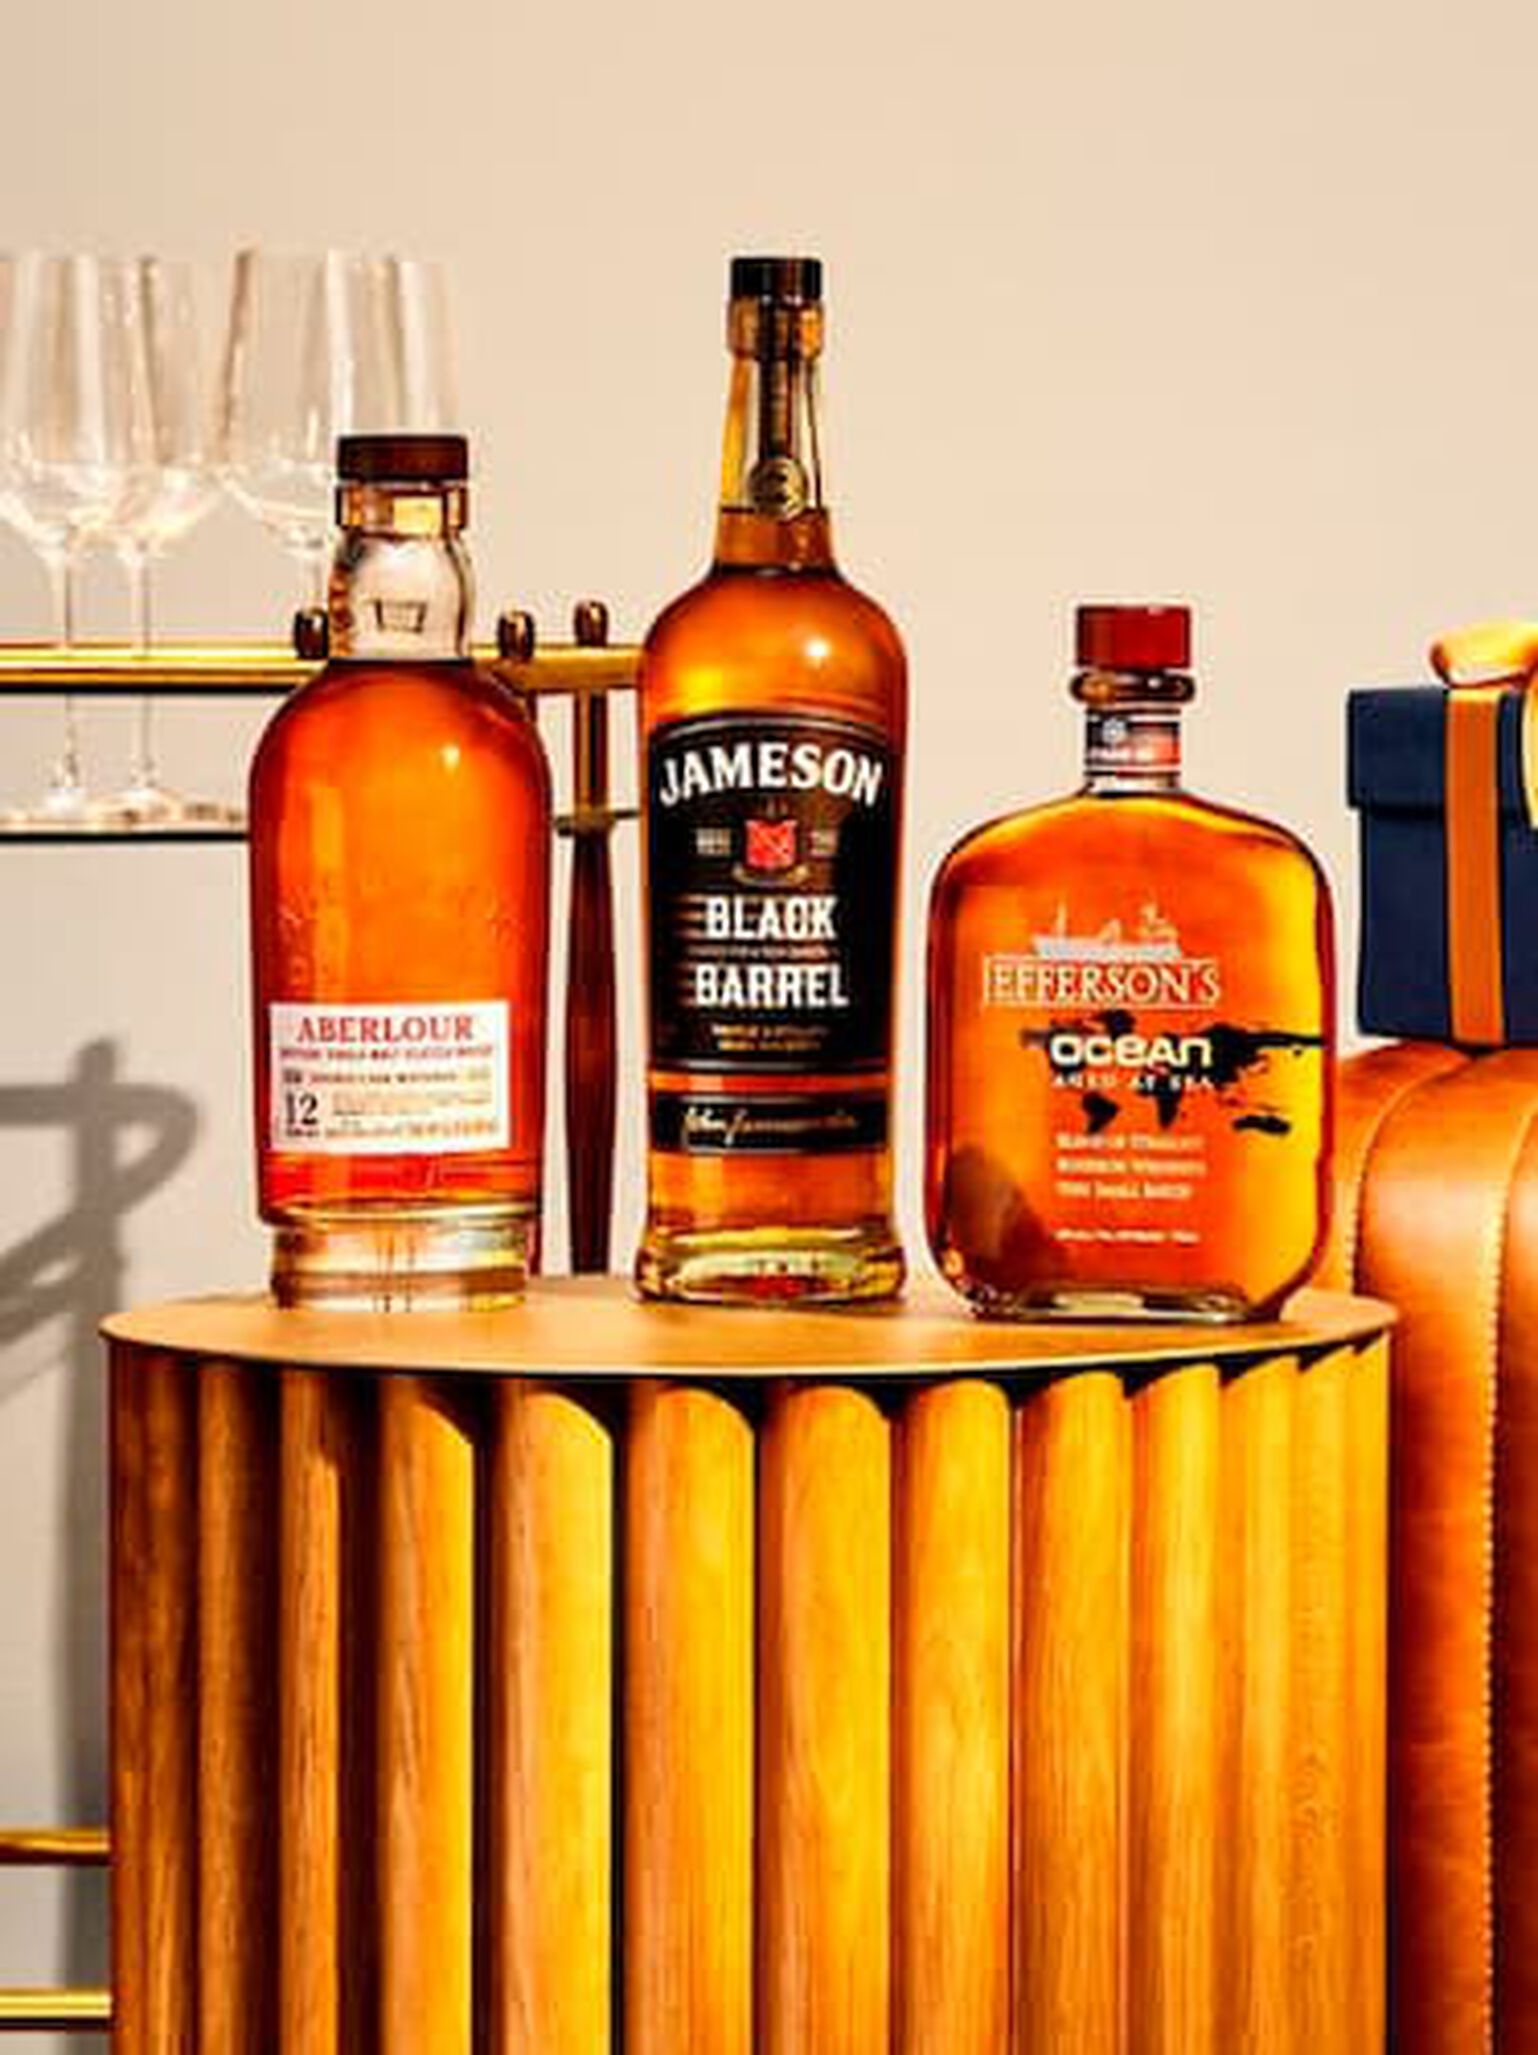 A collection of Father's Day spirits are ready to be opened on a leather couch